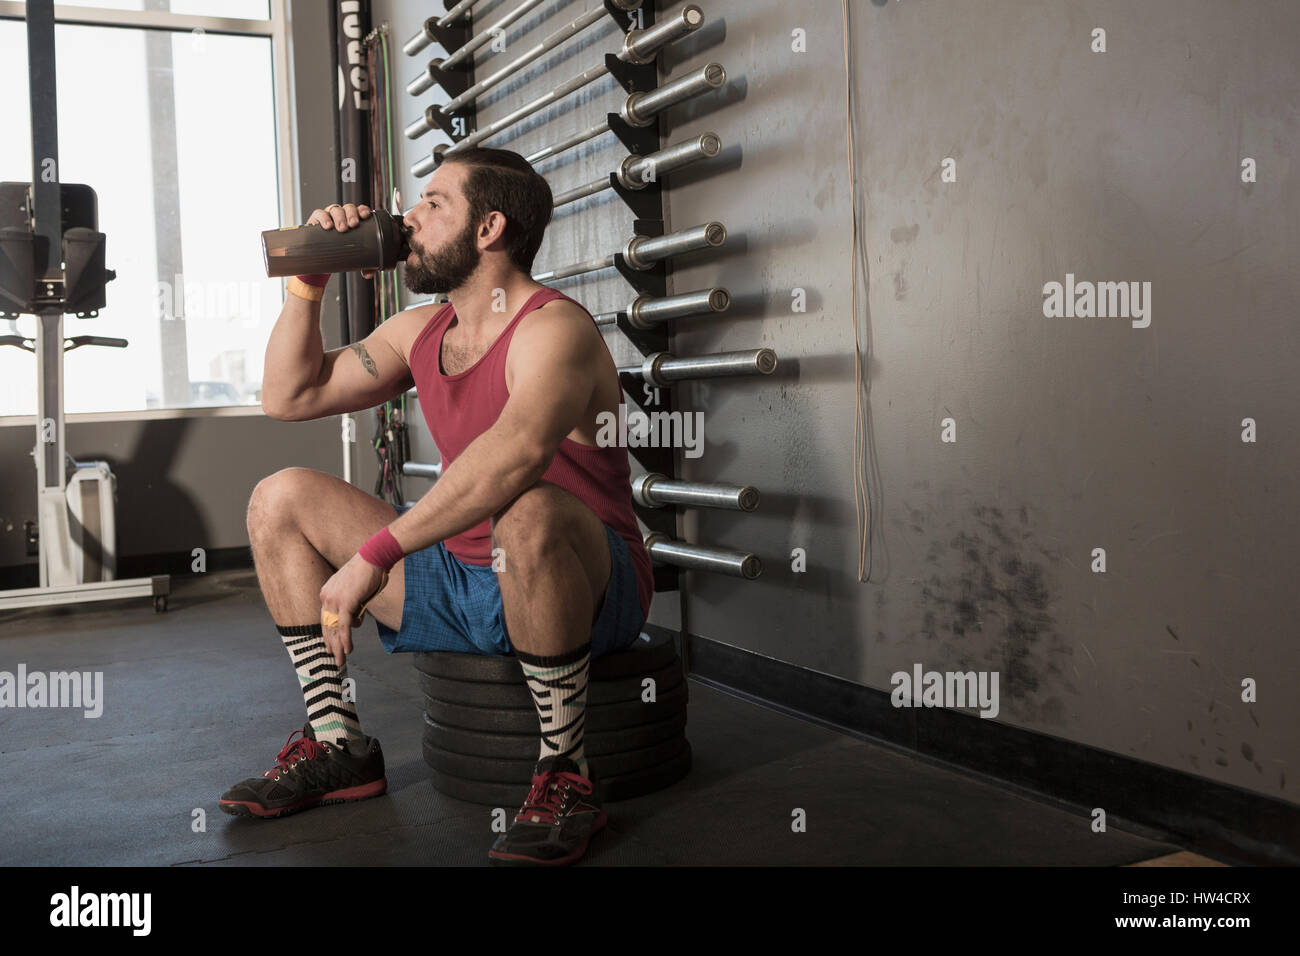 Mixed Race man drinking from bottle in gymnasium Stock Photo